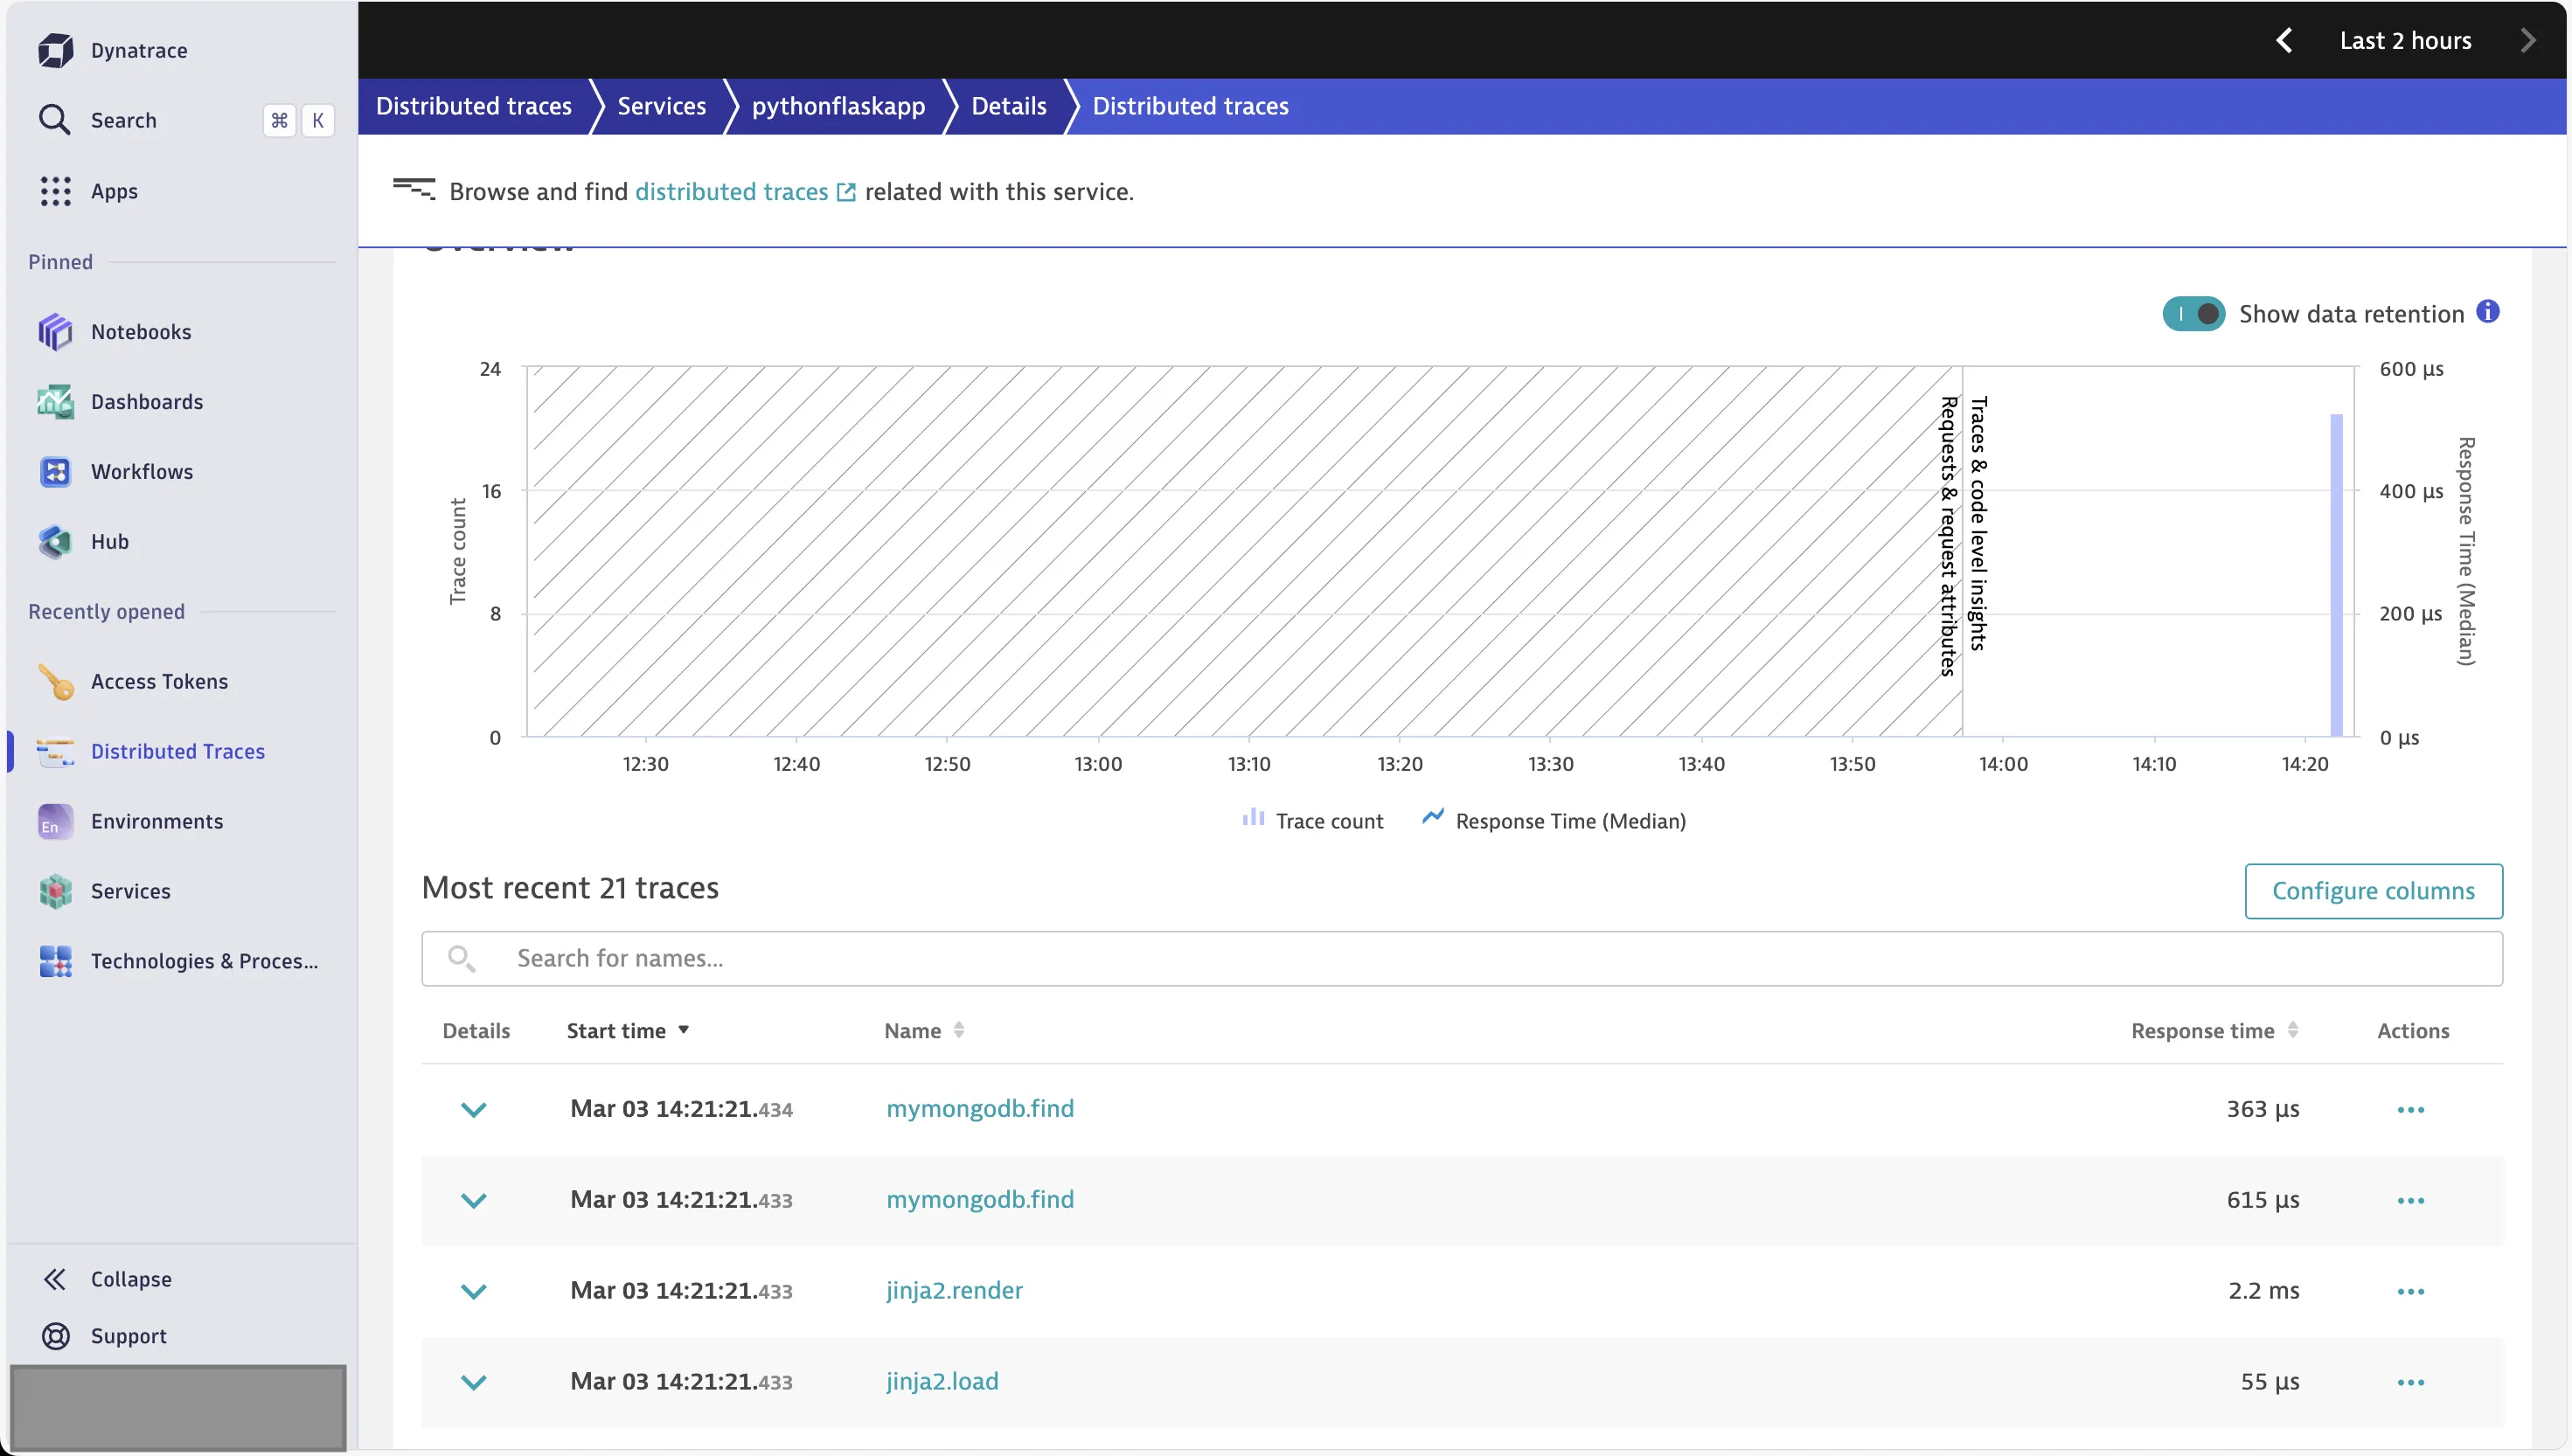 Captured traces in Dynatrace